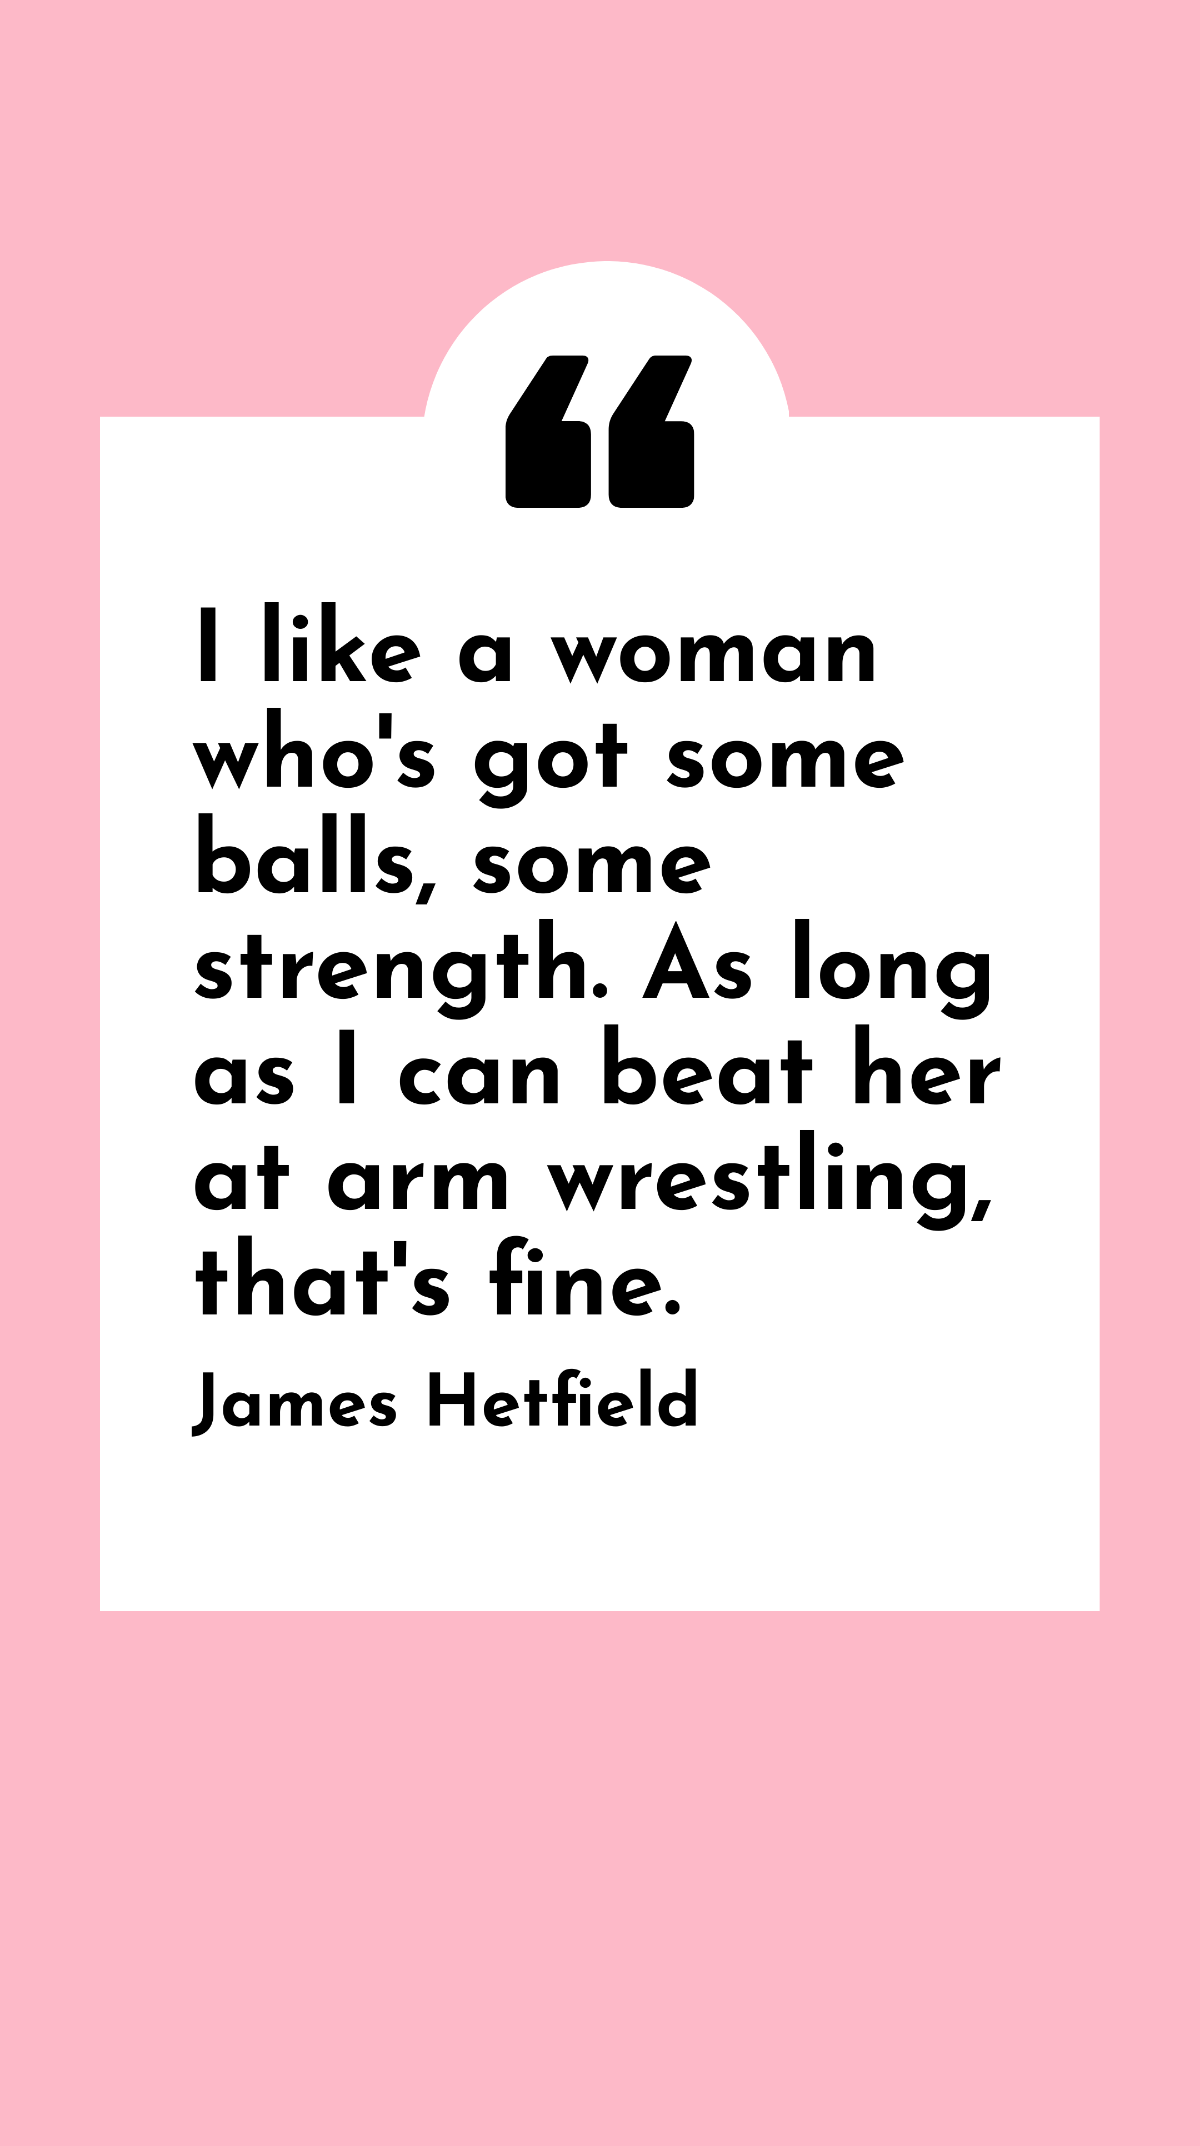 James Hetfield - I like a women who's got some balls, some strength. As long as I can beat her at arm wrestling, that's fine. Template